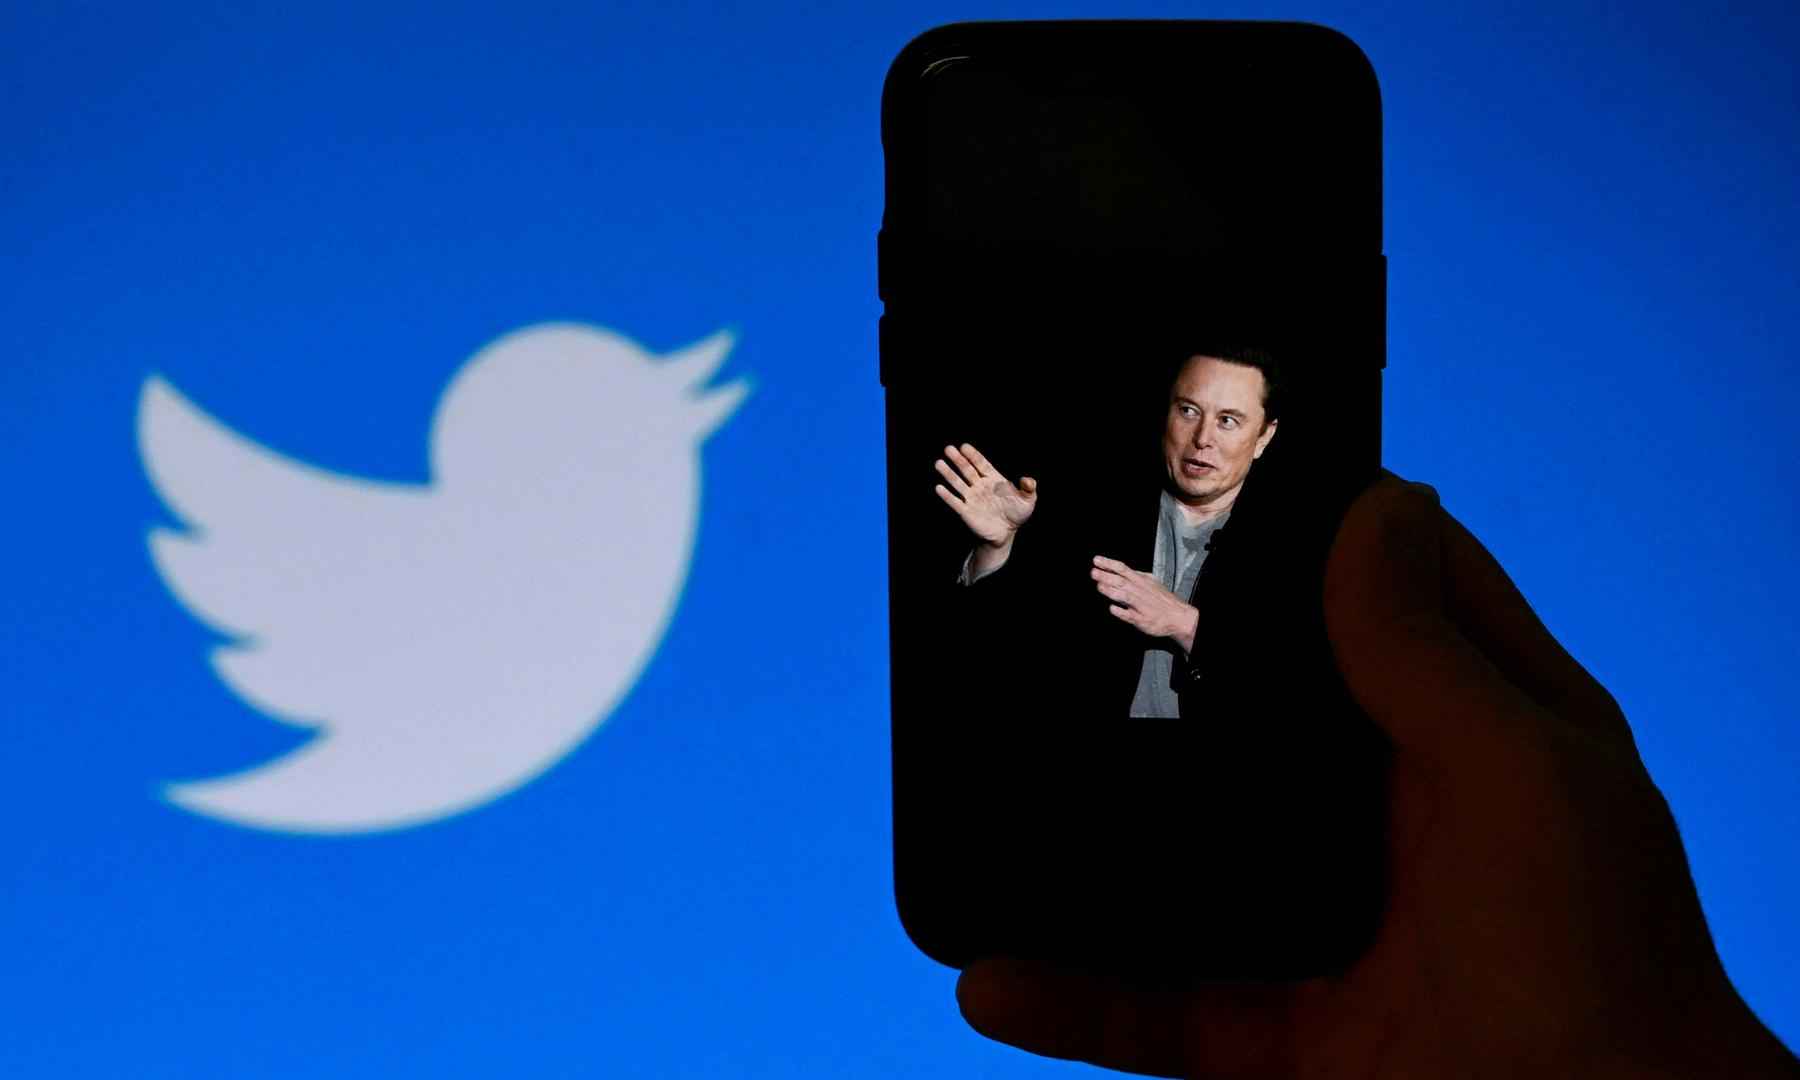 Twitter vai proibir links para outras redes sociais - OLIVIER DOULIERY / AFP

